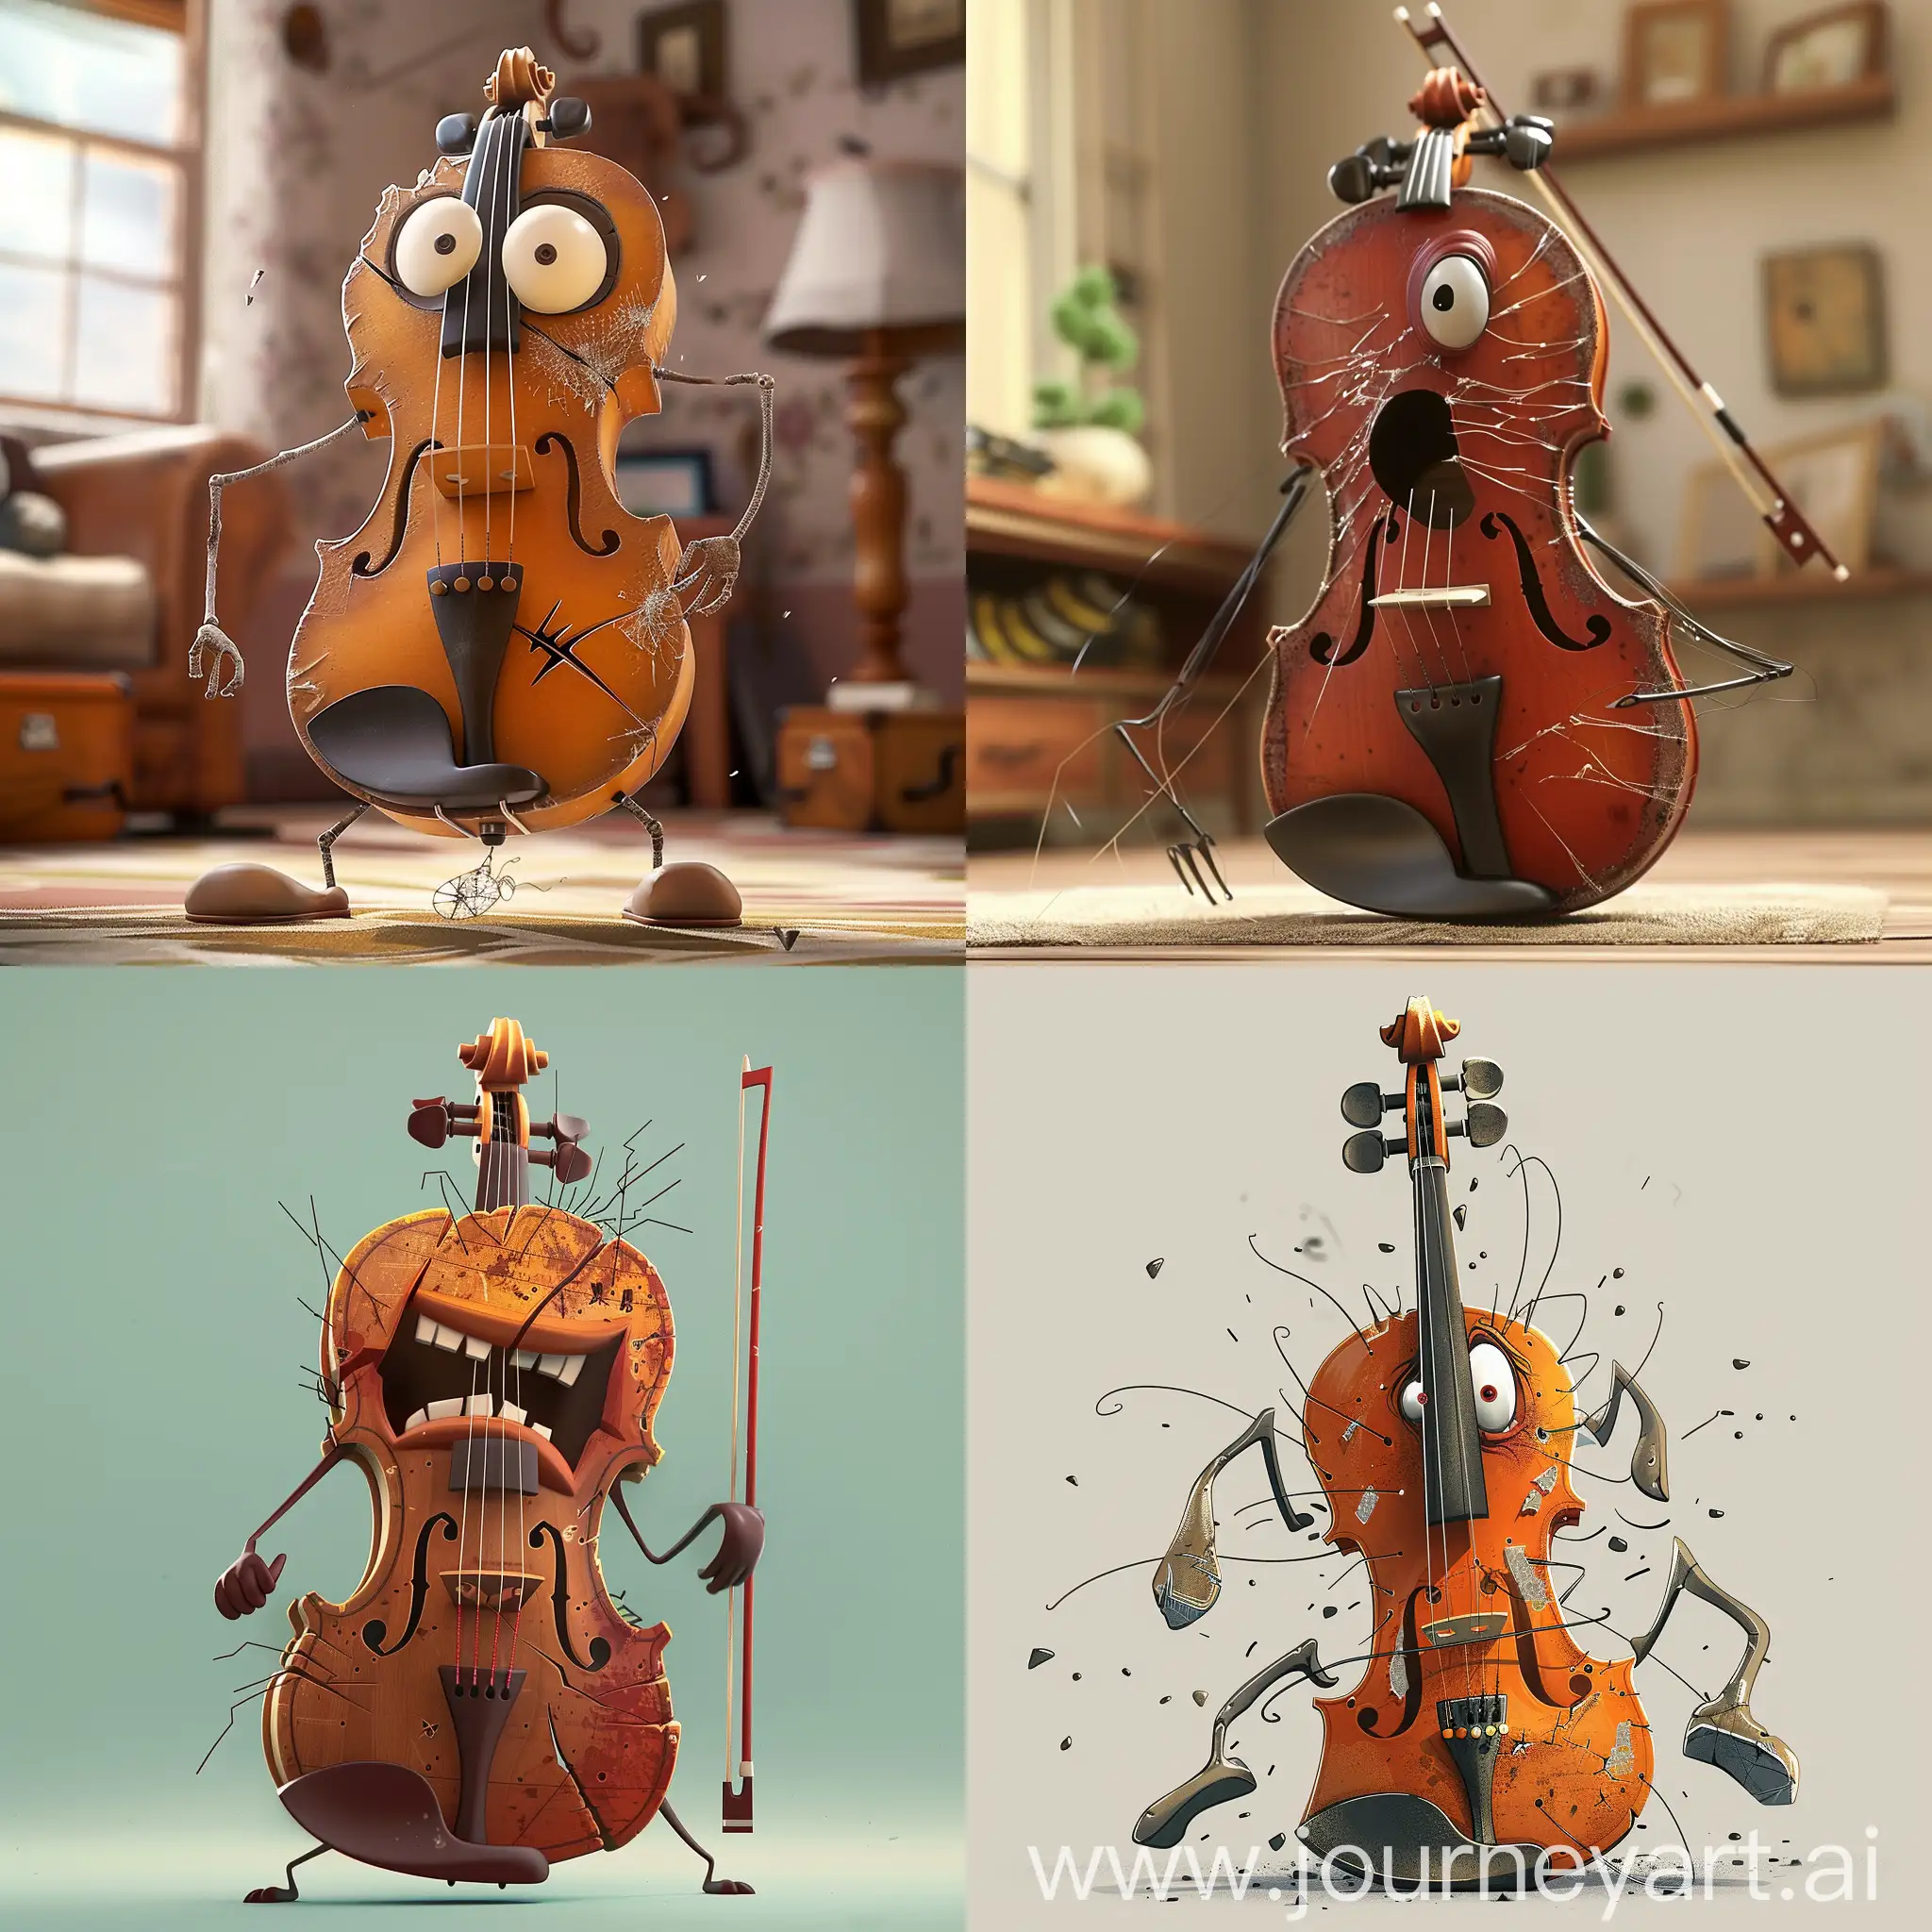 generate an animated cartoonish character based on a broken and SCARED violin. Its strings are frayed, its body scarred. with scared expresssion